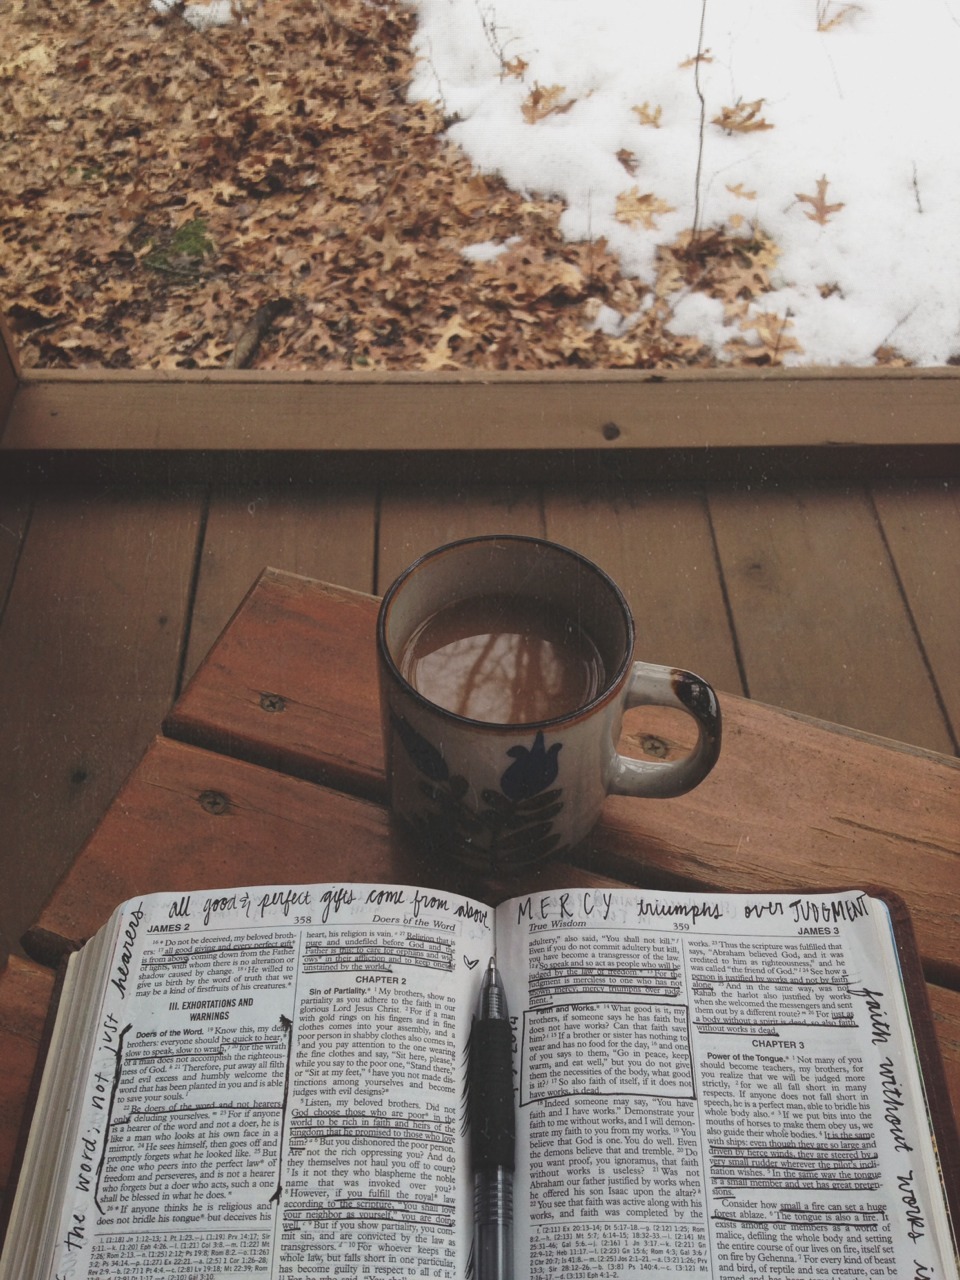 kvtes:
“ porch prayers while it rained this morning.
”